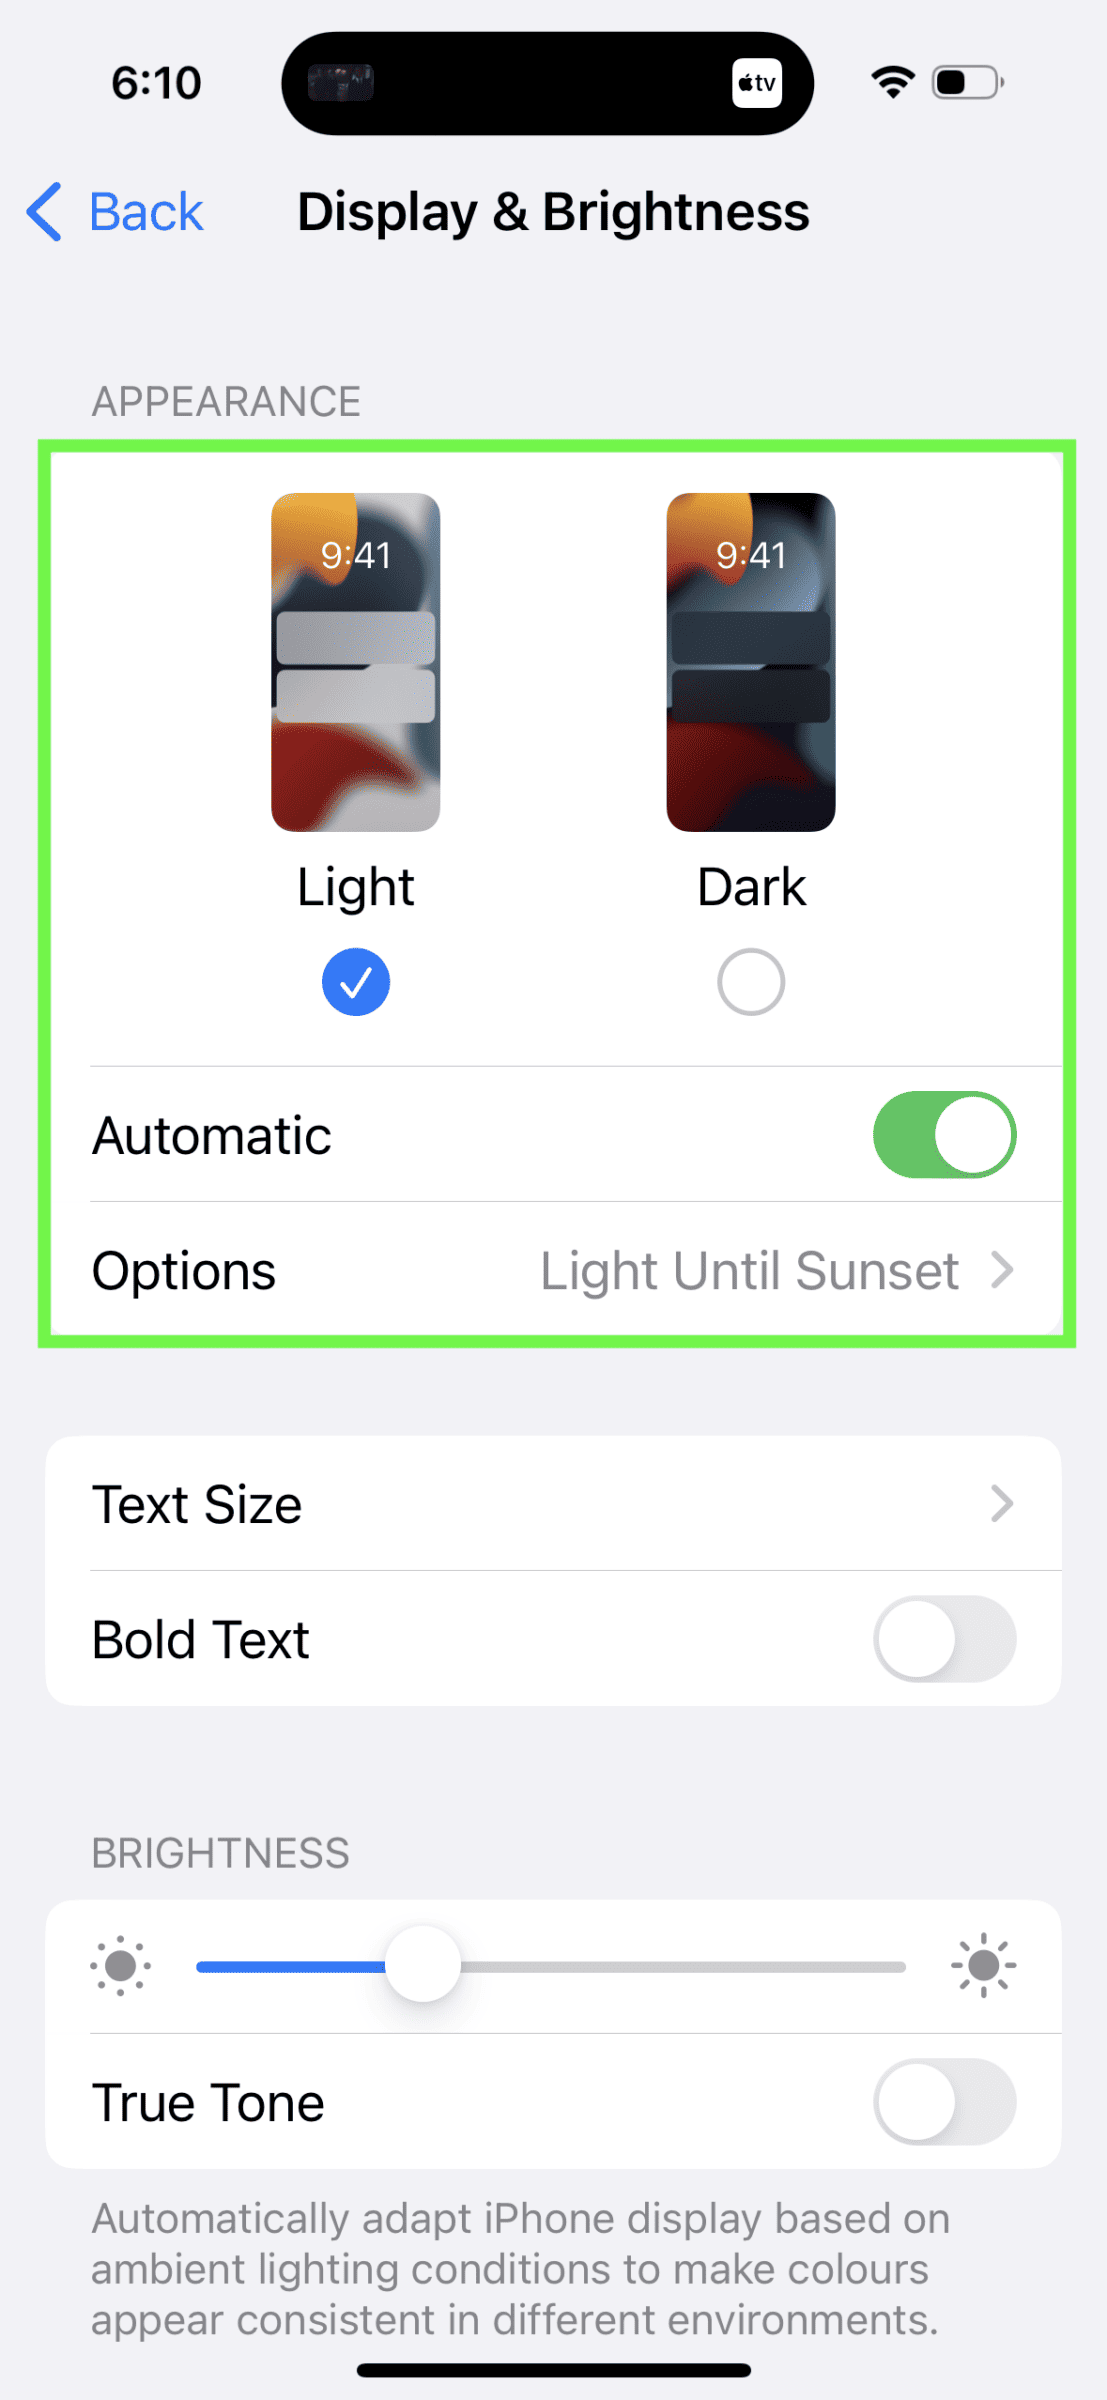 A screenshot of the appearance settings within the display and brightness settings on an iPhone.